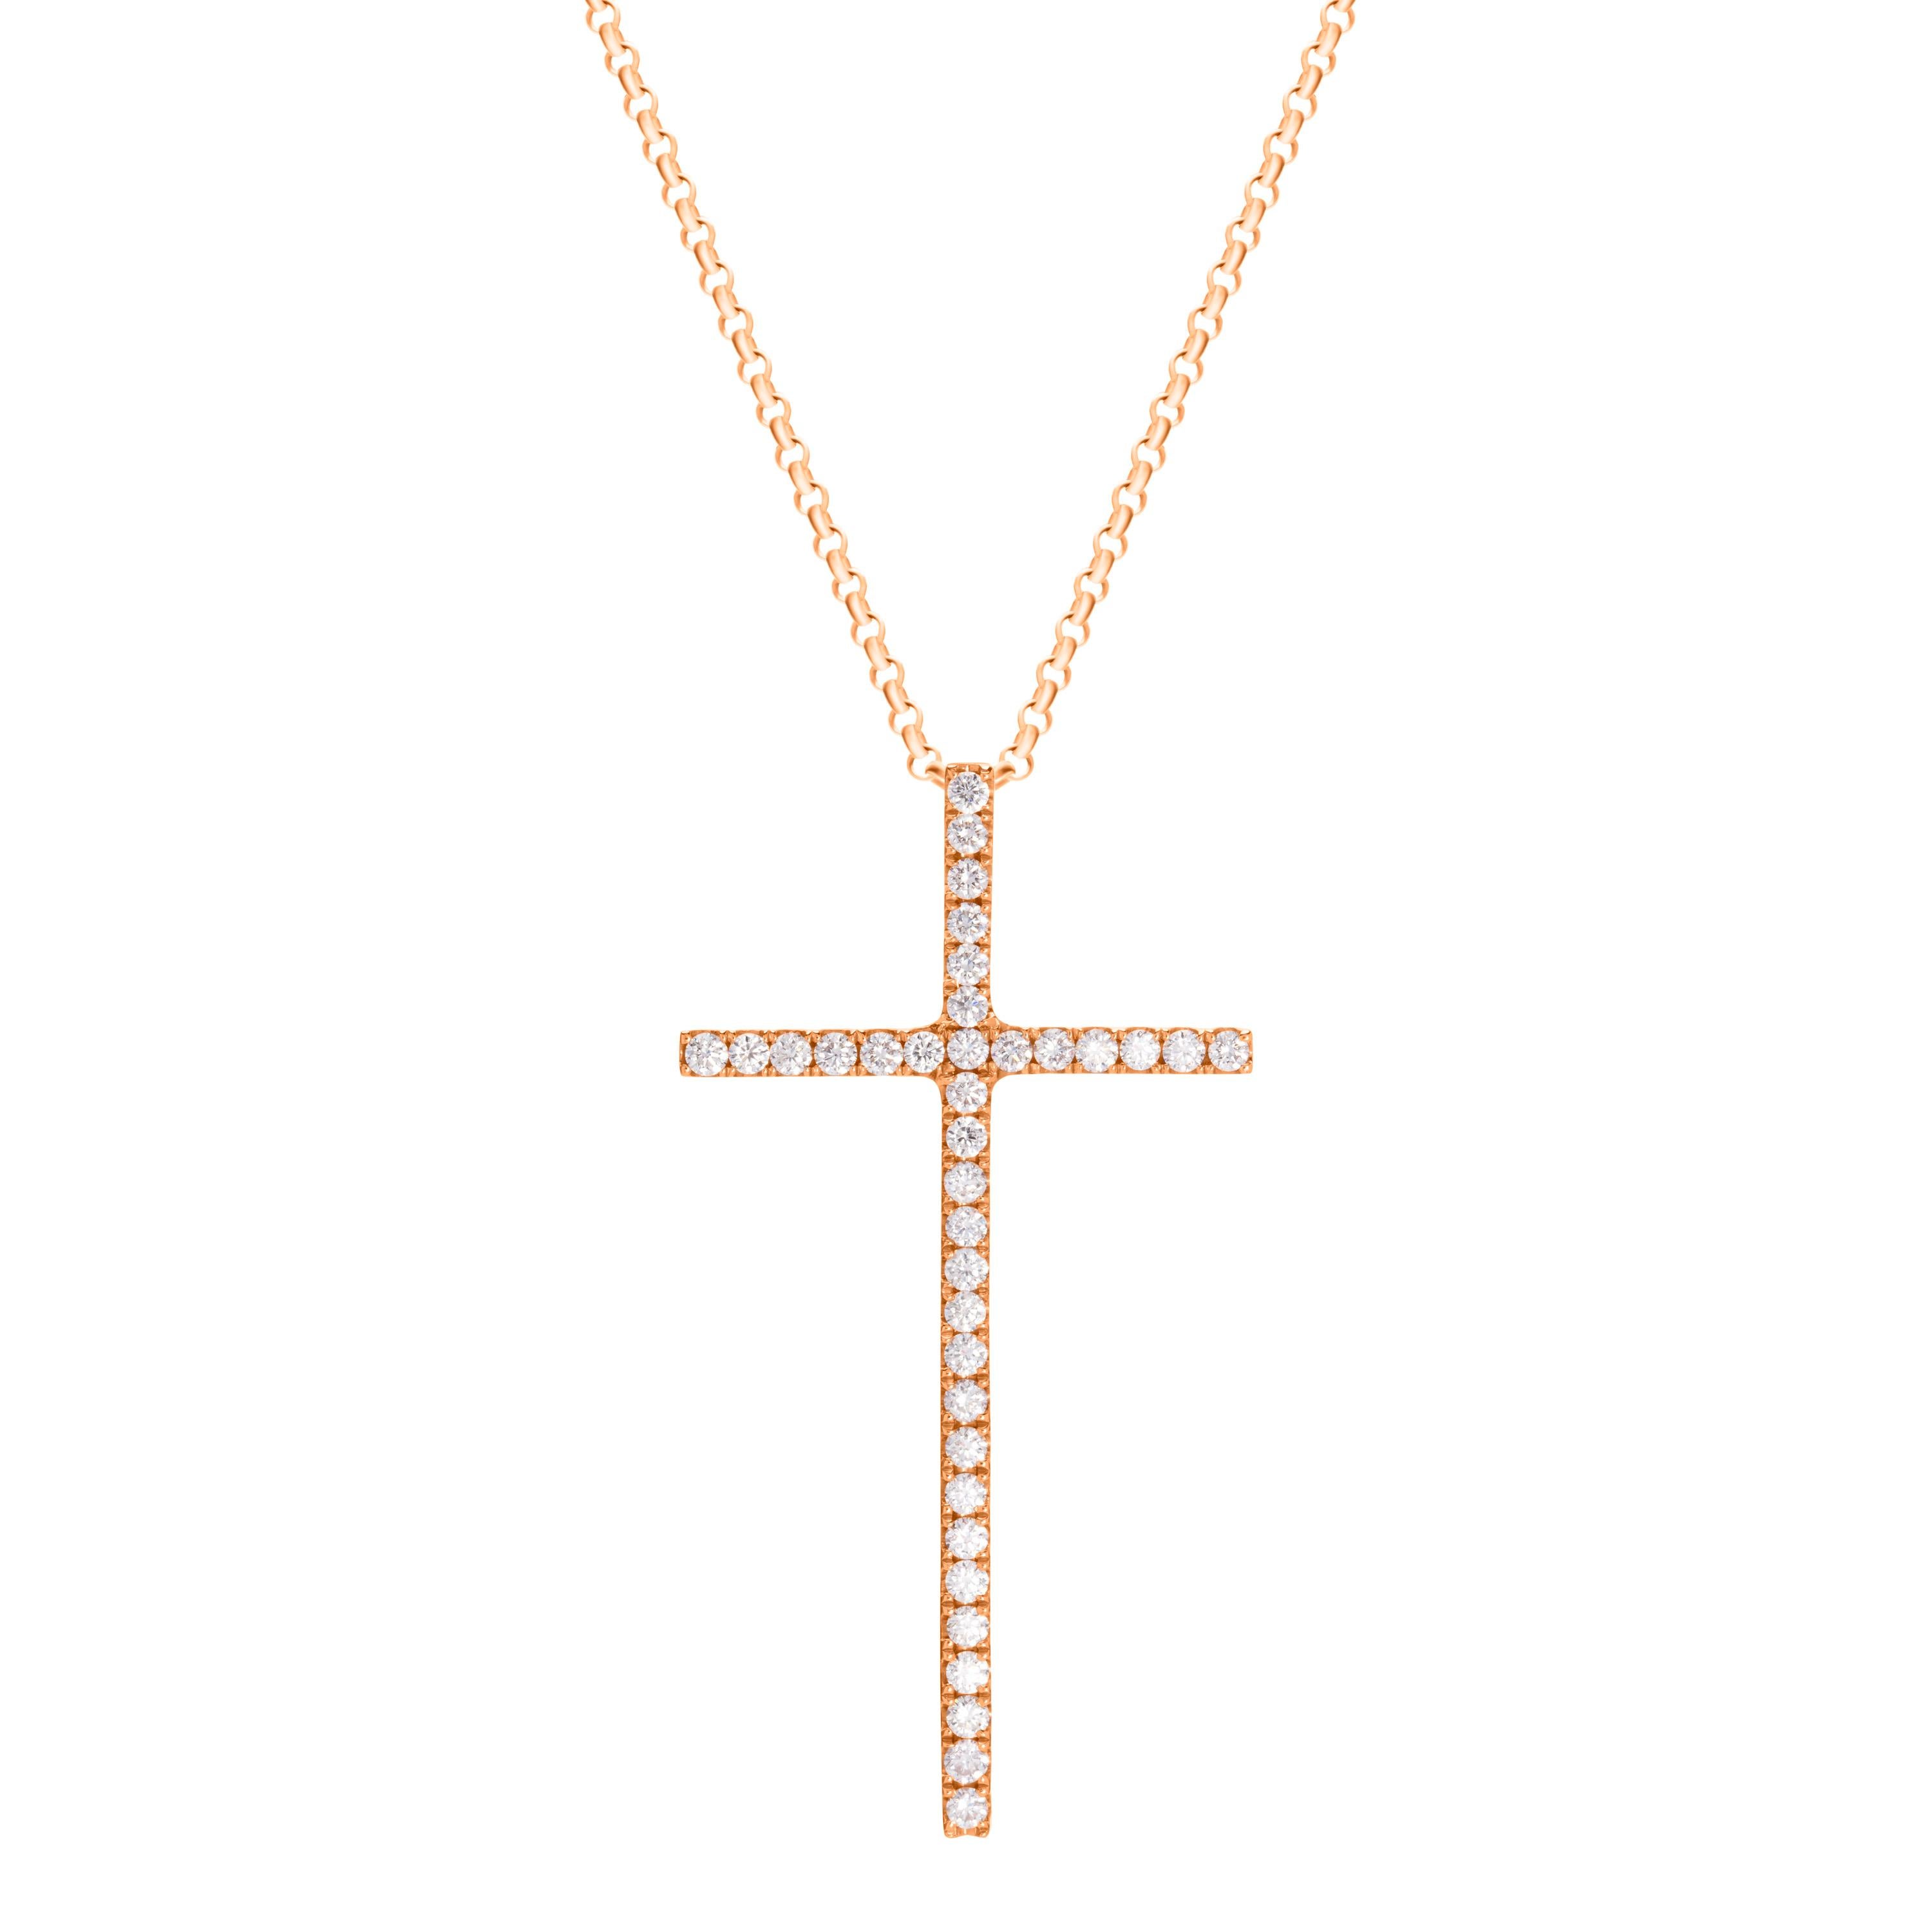 18-karat rose gold necklace features a cross pendant accented by 0.60 carats of round brilliant cut diamonds.  Pendant height 4cm, pendant width 2cm.  Chain length 18 inches.  

Composition:
18K Rose Gold
36 Round Diamonds: 0.6 carats
Diamond